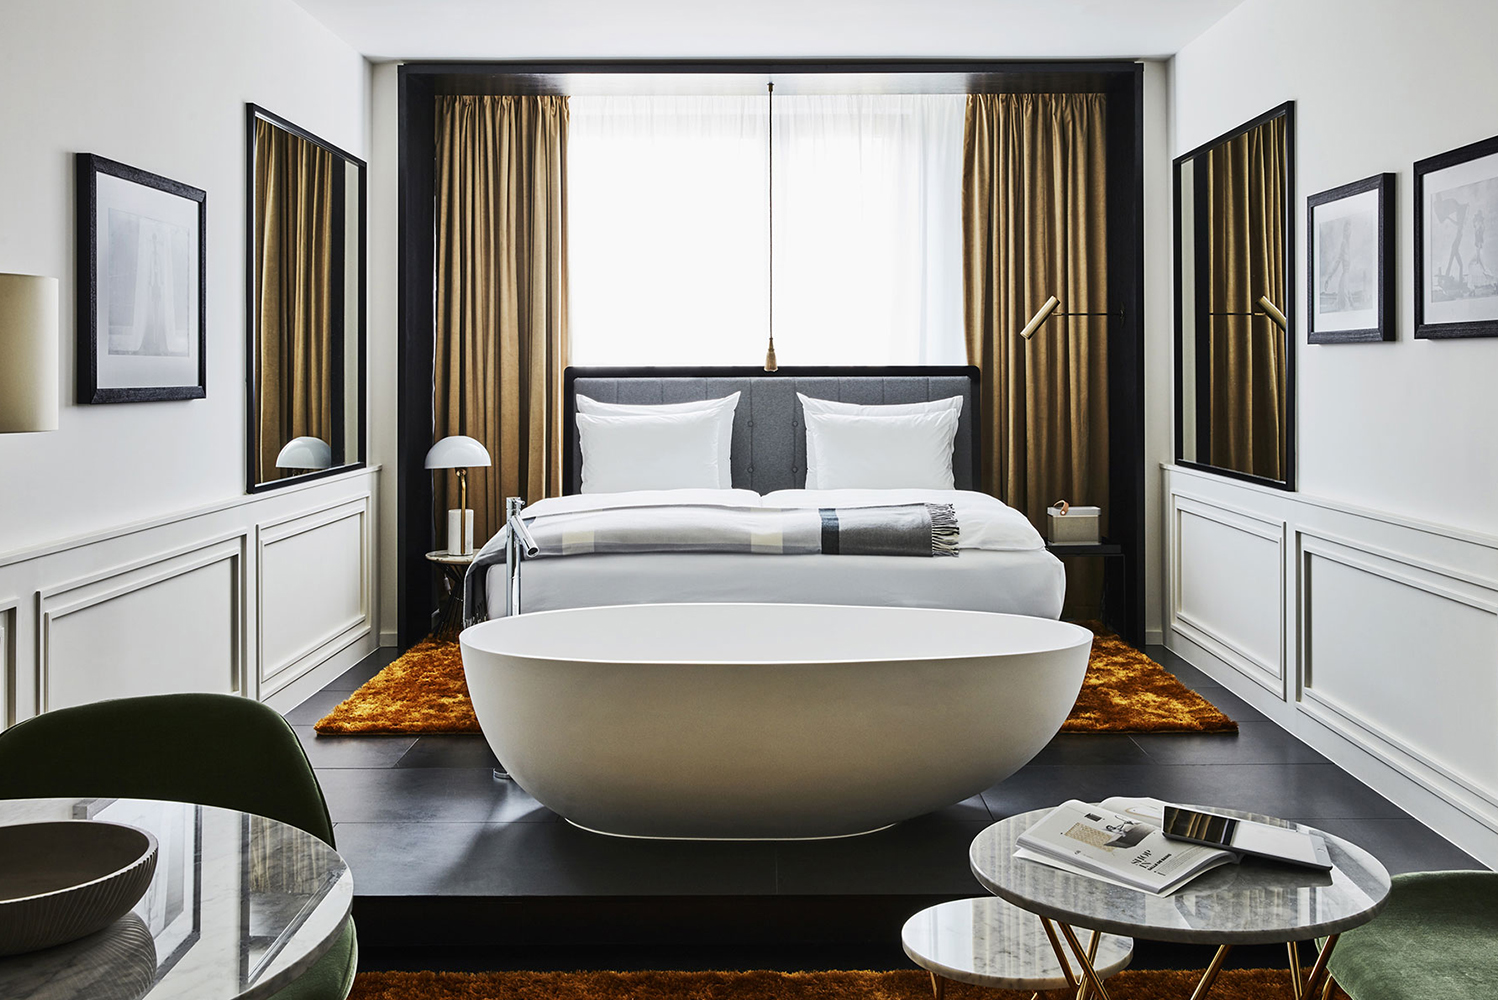 The 281 guestrooms and suites layer contemporary dcor with unconventional touches and artwork